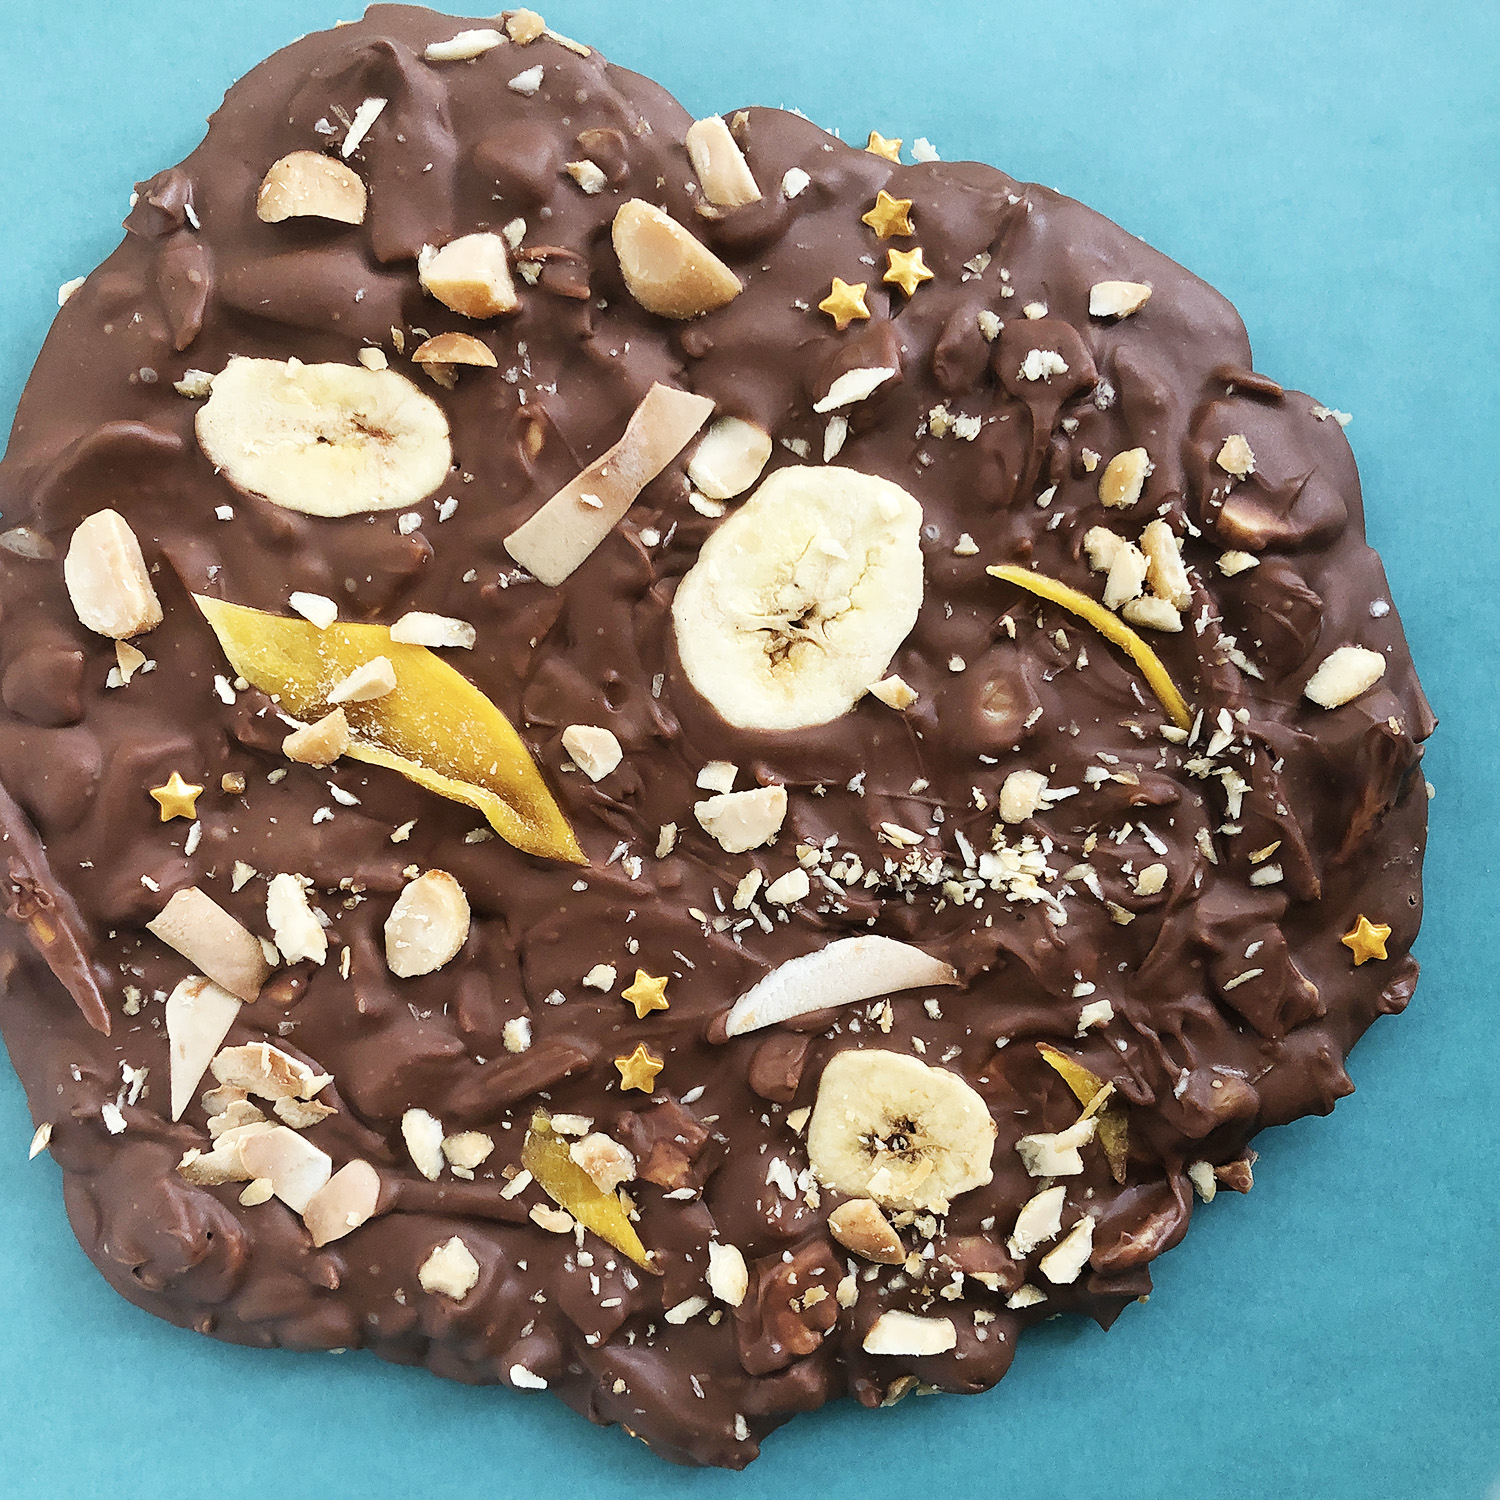 Top-down view of Milk Chocolate Bark with tropical ingredients: dried mango, banana chips, toasted coconut, and macadamia nuts